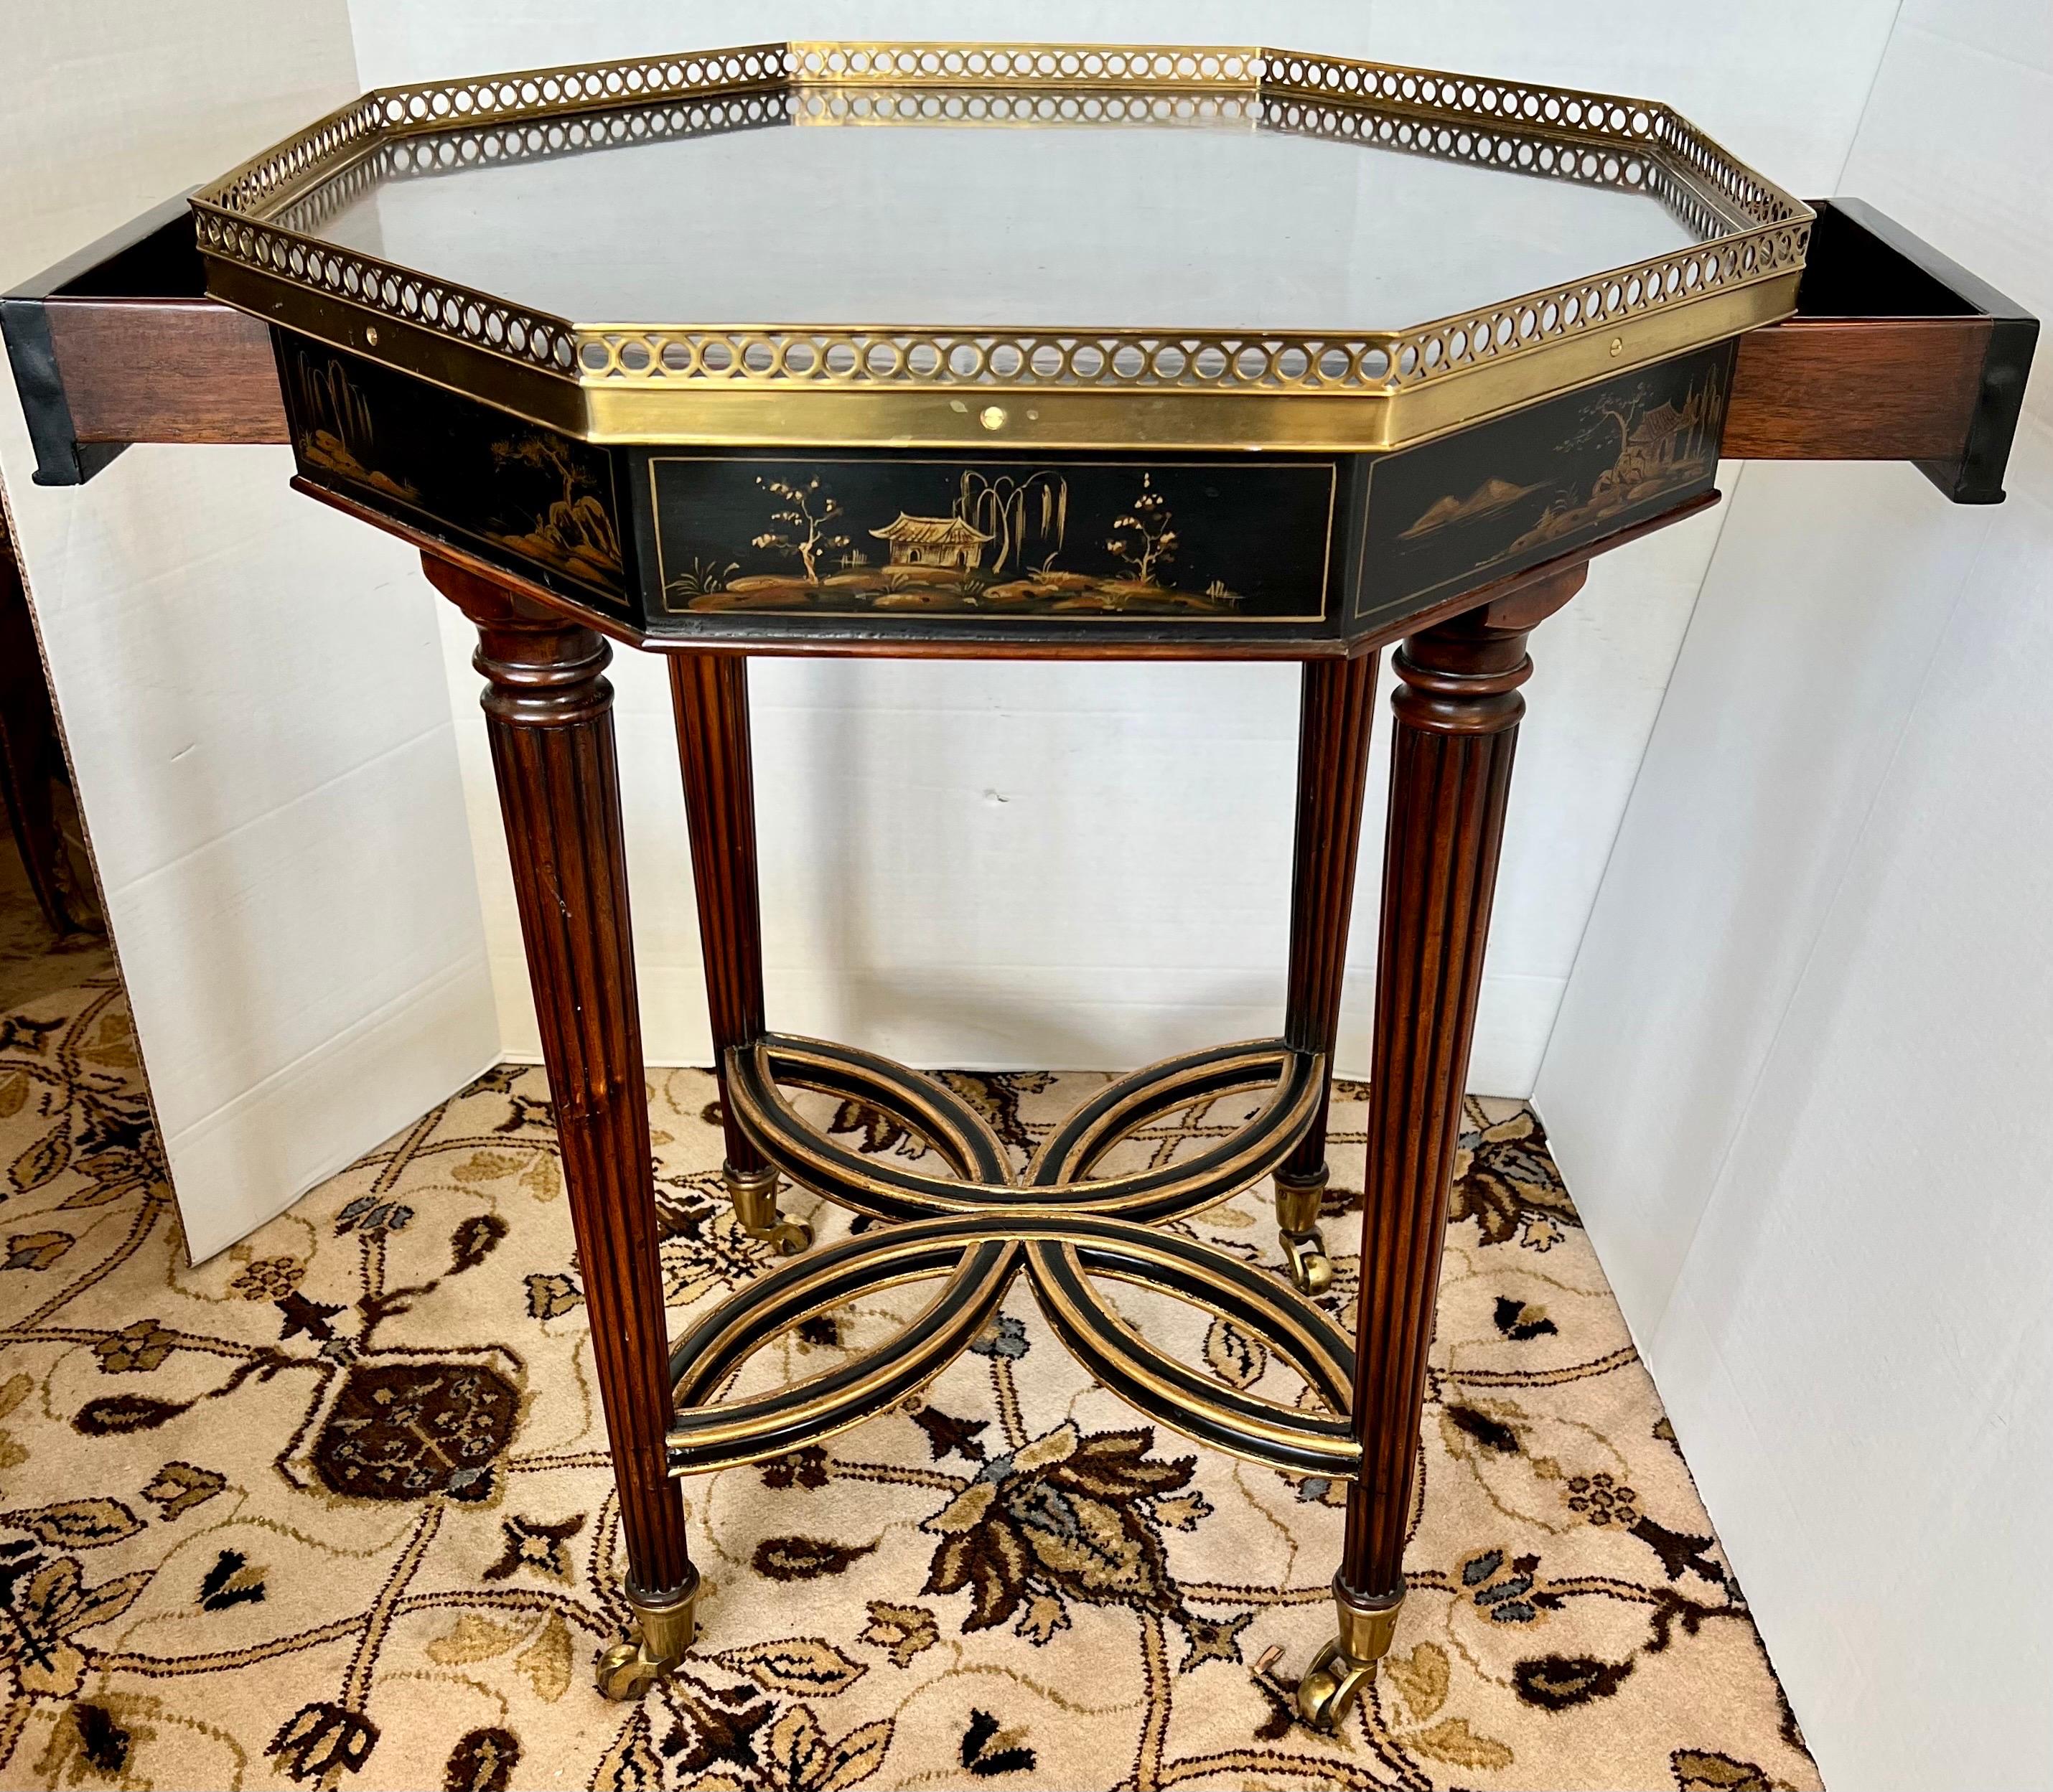 Tunning chinoiserie black lacquered octagonal table with painted gold scenery on the top and sides. Two drawers on either side and pierced brass gallery. Carved fluted legs with brass castors for ease of movement. Theodore Alexander plaque inside